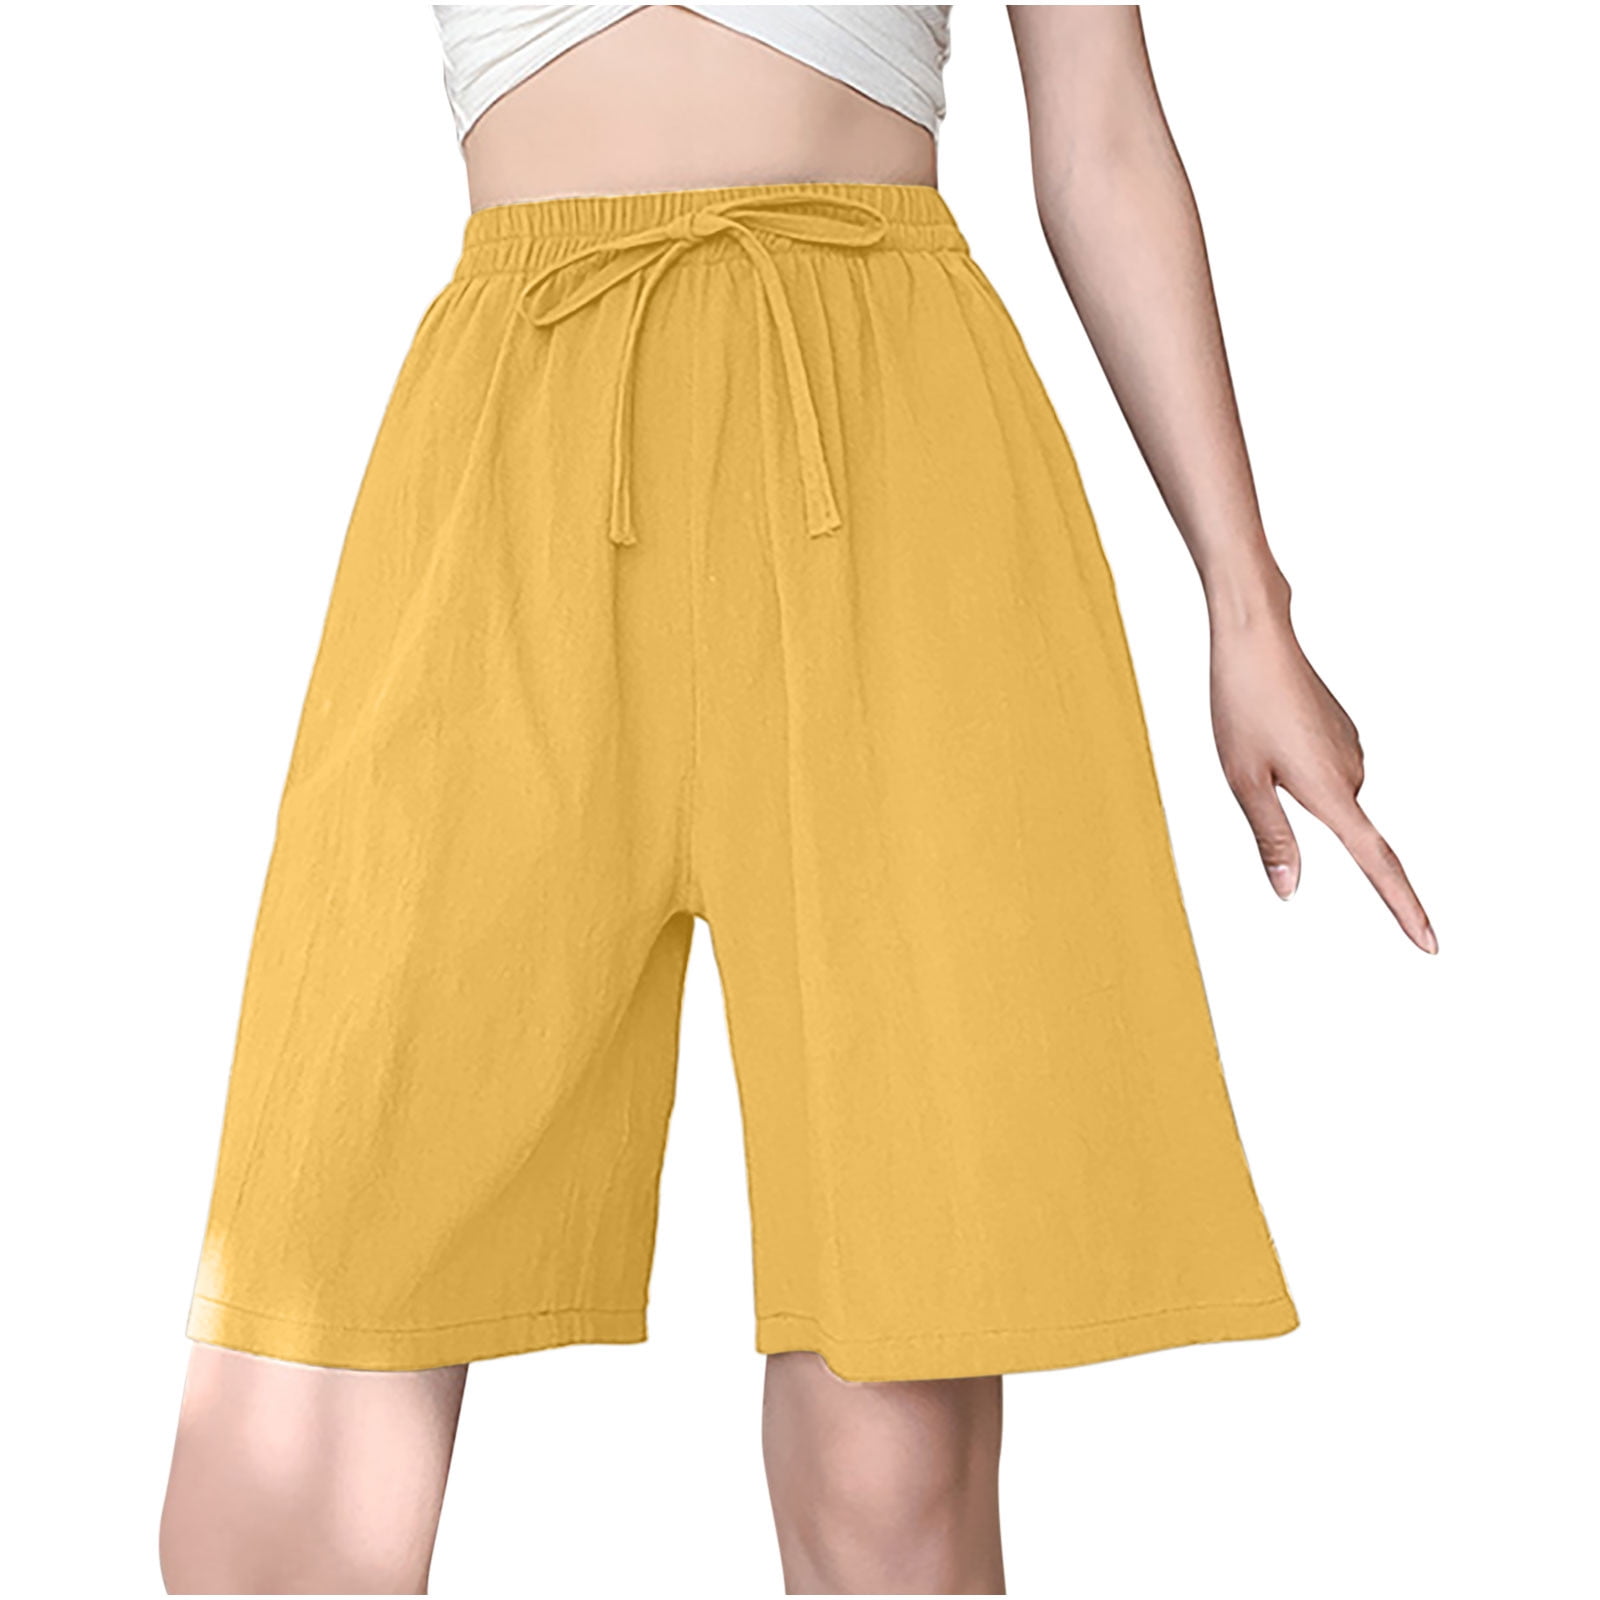 QUYUON Womens High Waisted Shorts Womens Flowy Shorts Knee Length